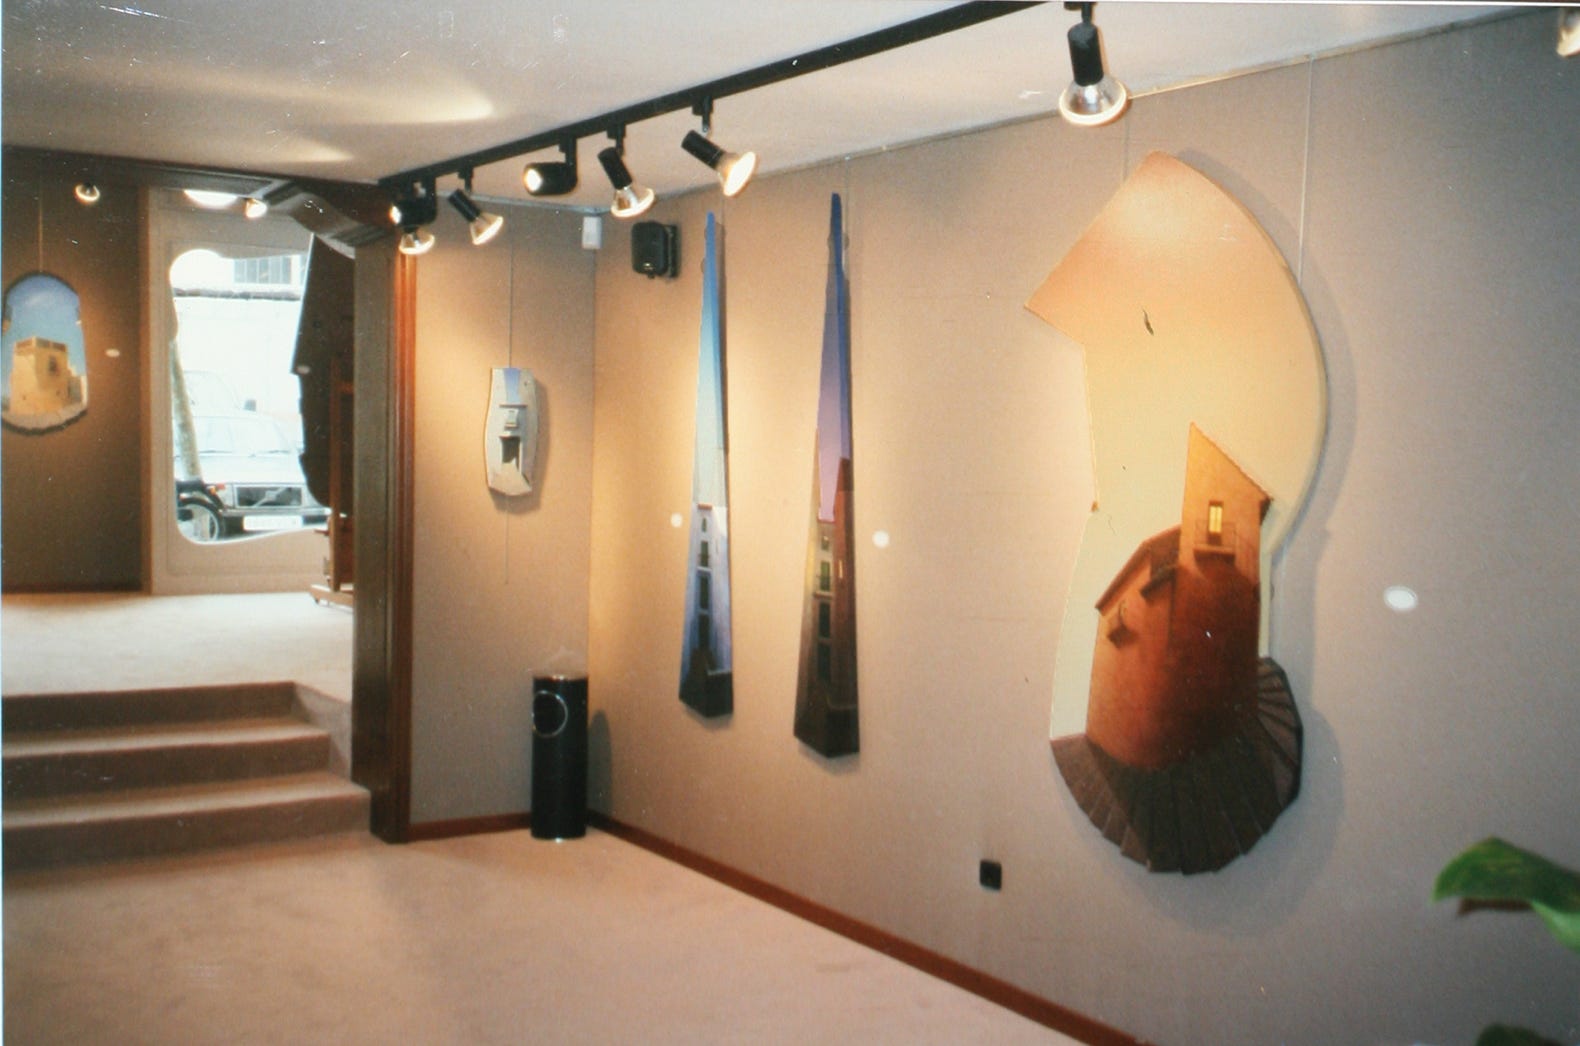 Photograph of the exhibition 'Paul Critchley' at Galeria D'Art Mar, Barcelona 2